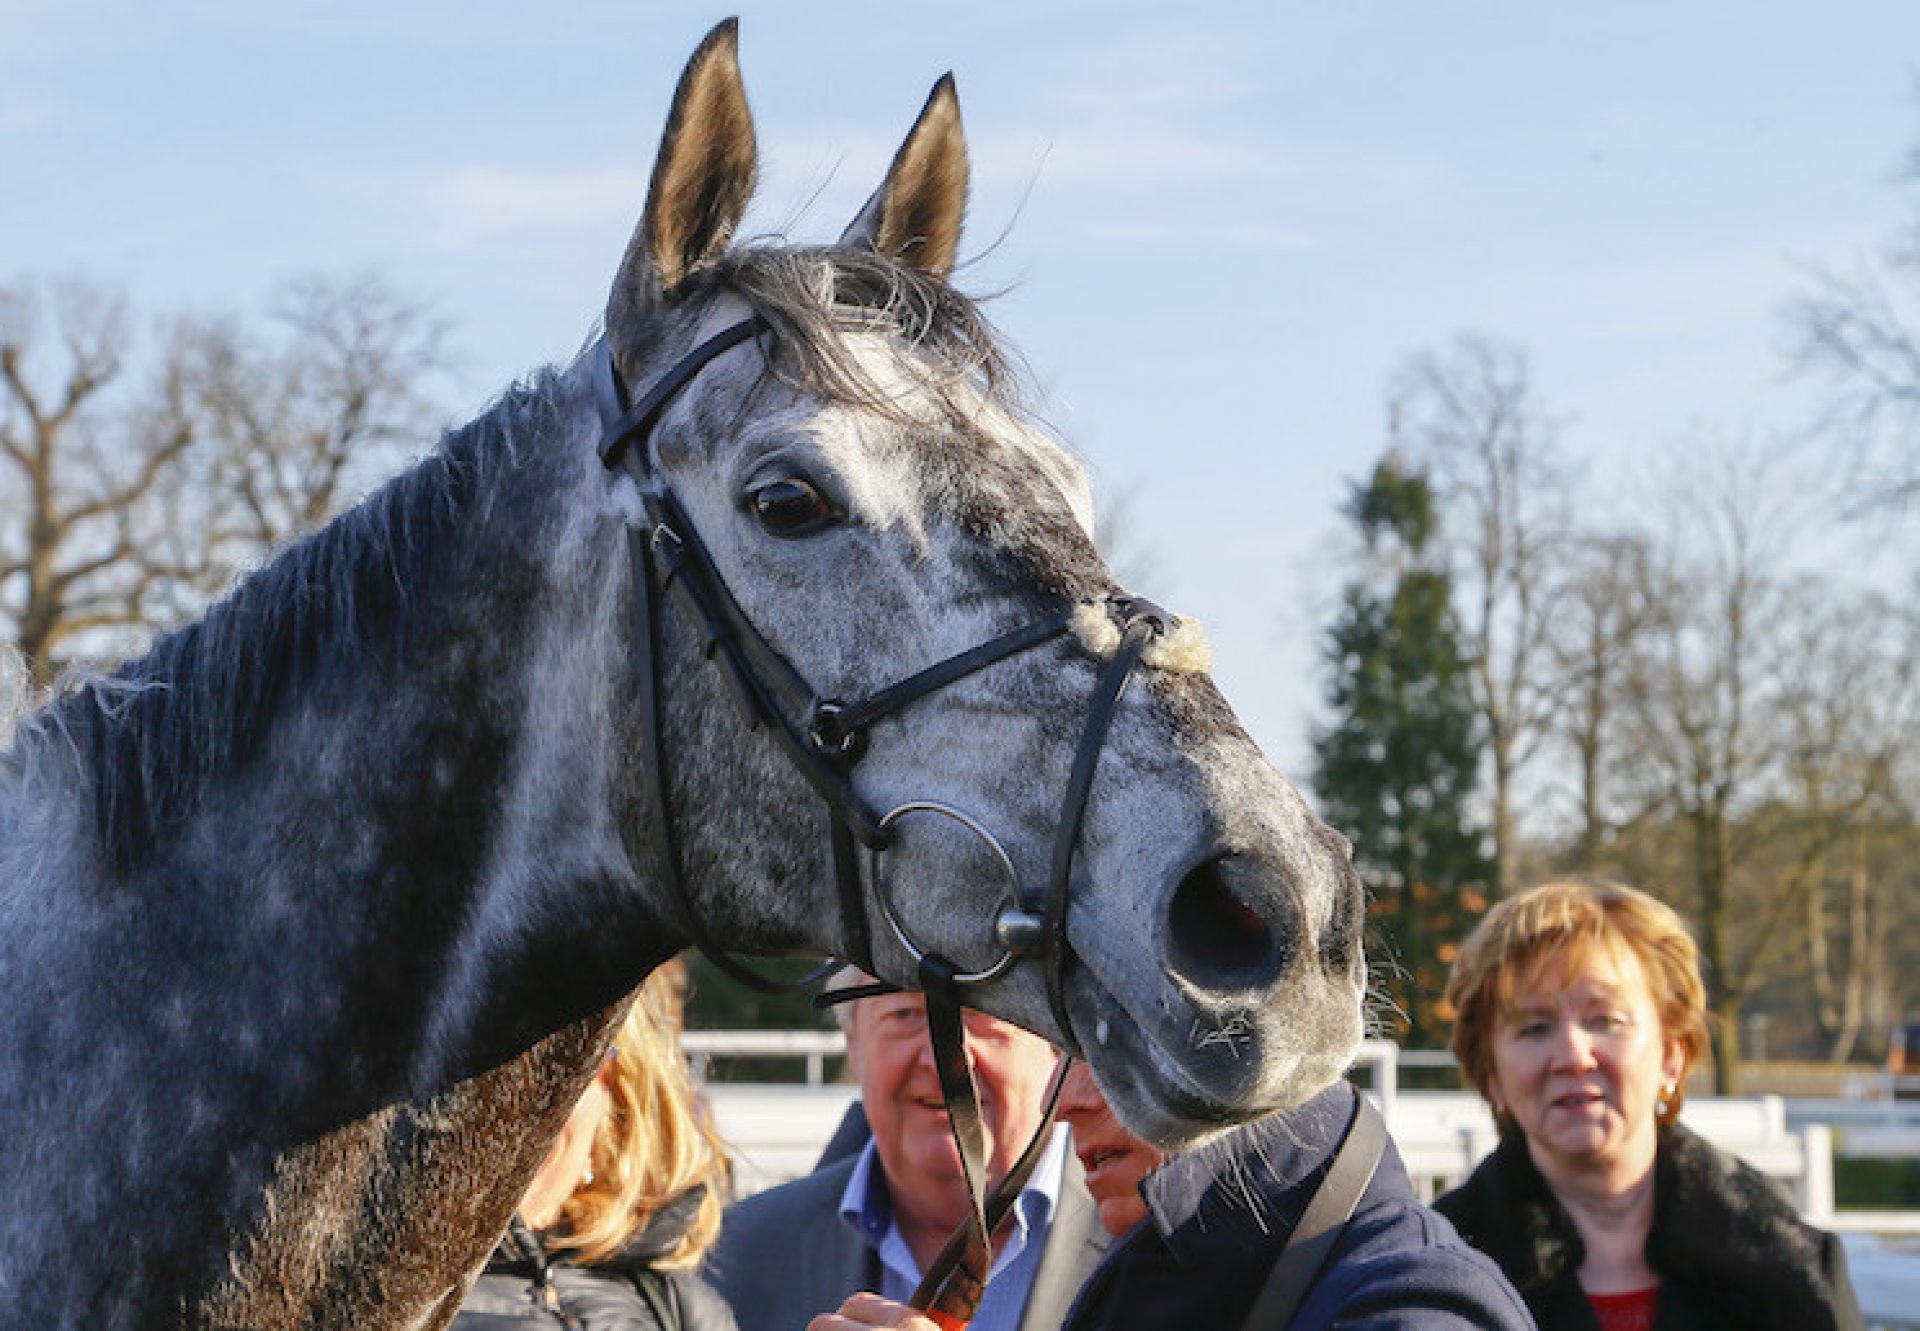 Master The World (Mastercraftsman) after winning the G3 Winter Derby at Lingfield